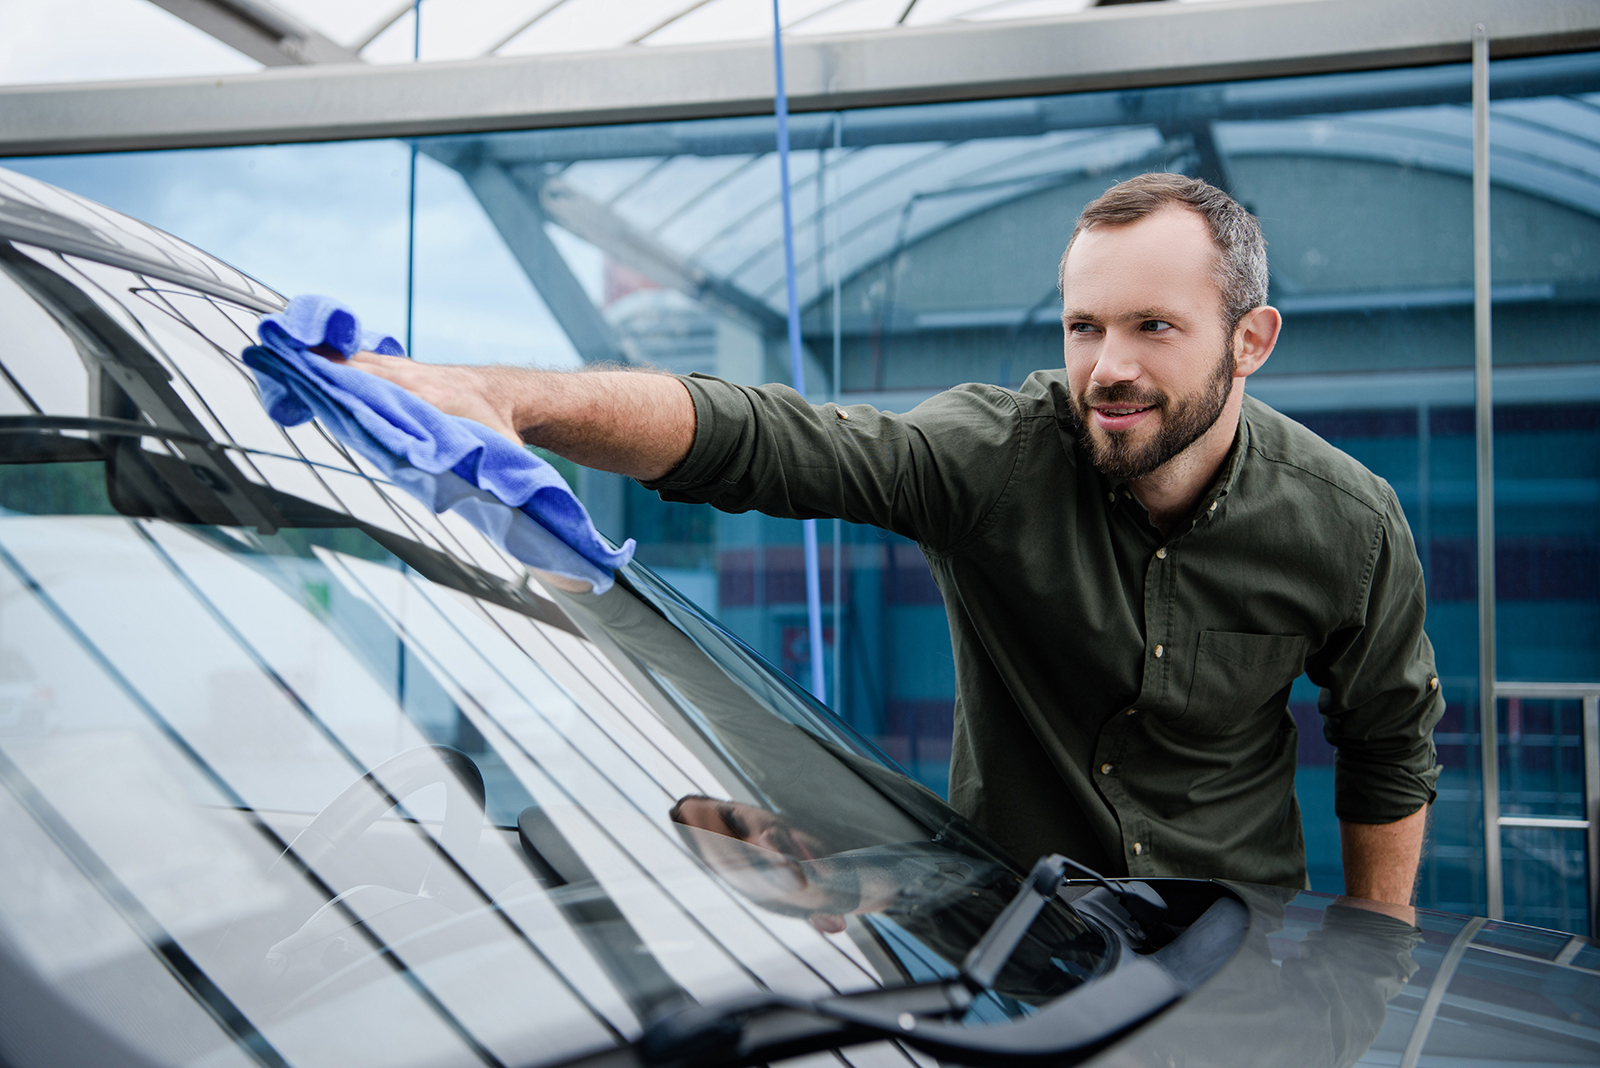 Man wiping the car wind shield with a cloth.